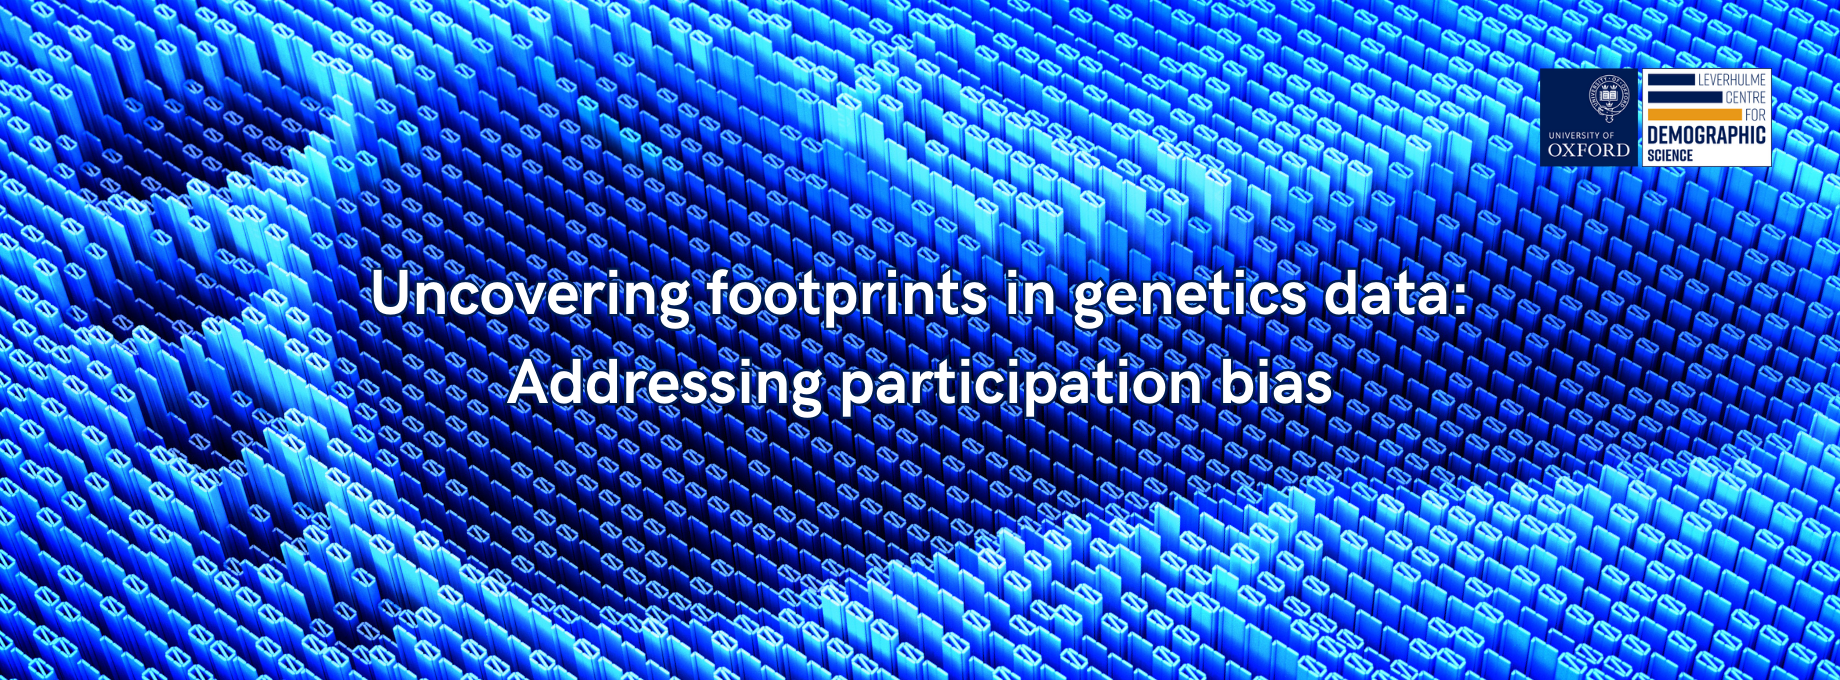 Digital footprint with LCDS logo and text: 'Uncovering footprints in genetics data: Addressing participation bias'